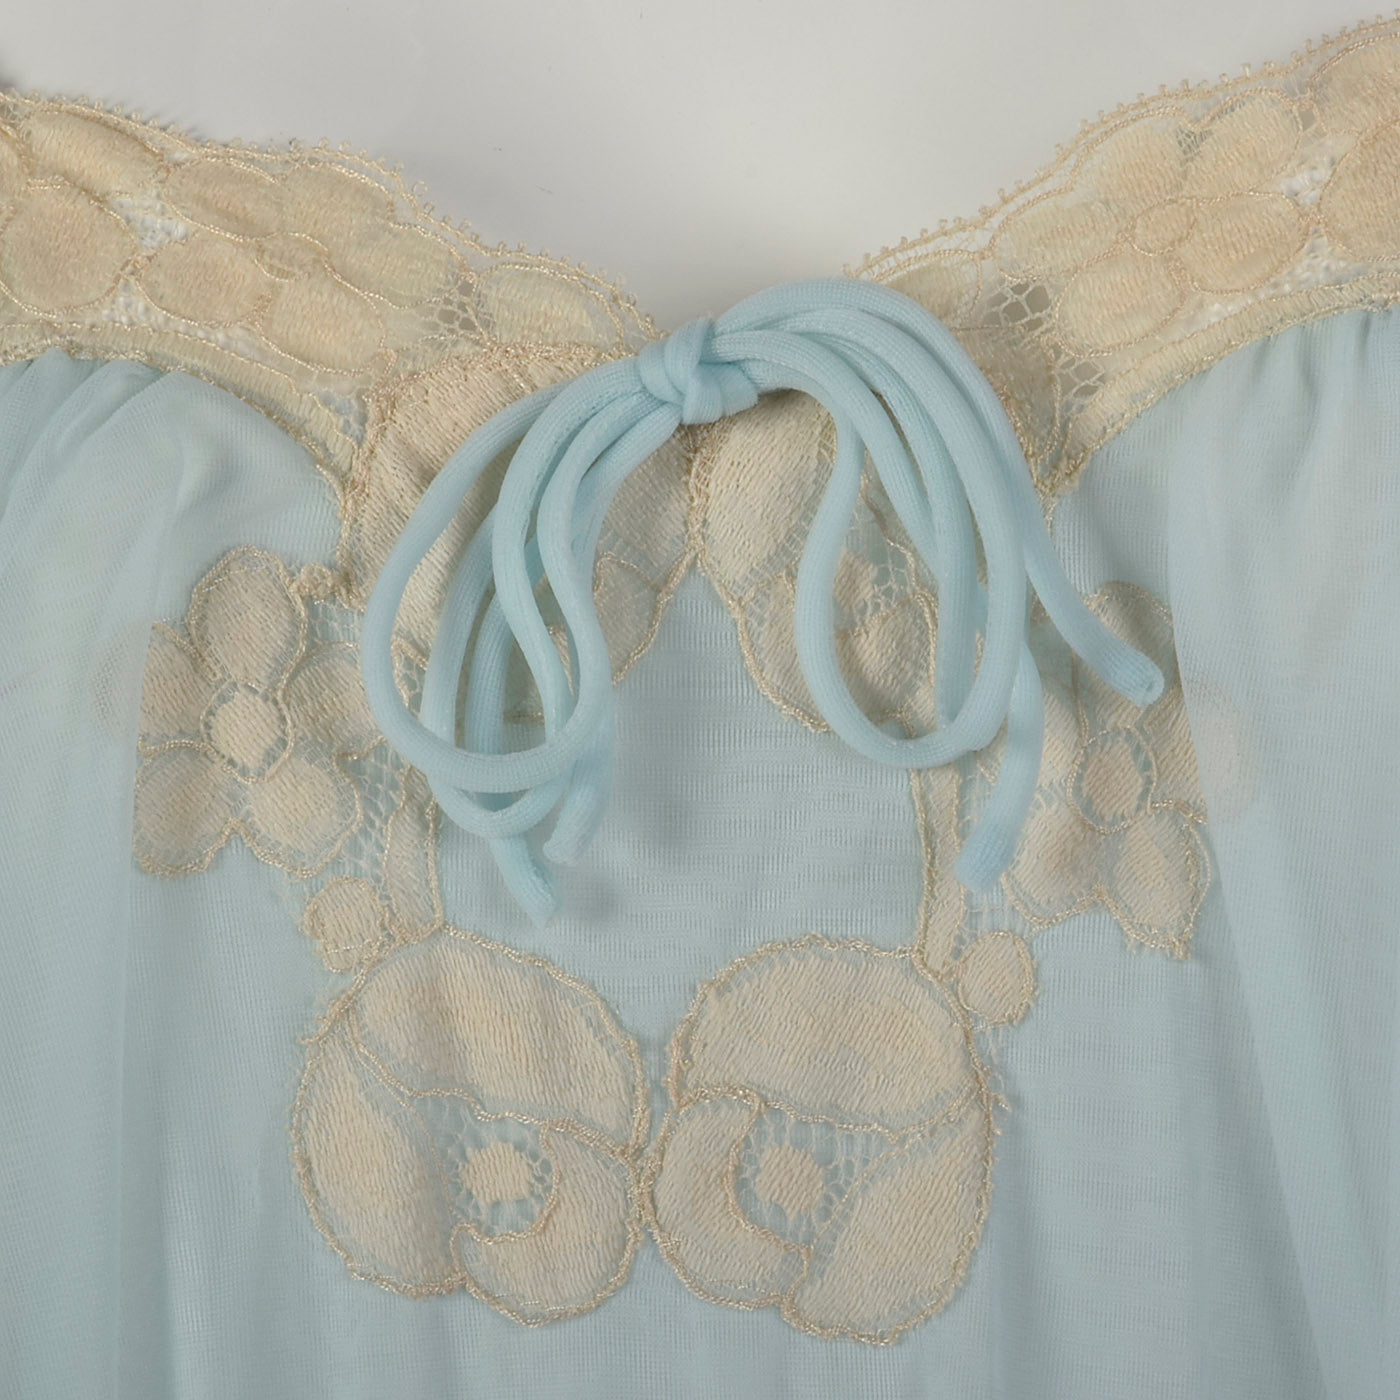 1950s Blue Nightgown and Peignoir Set